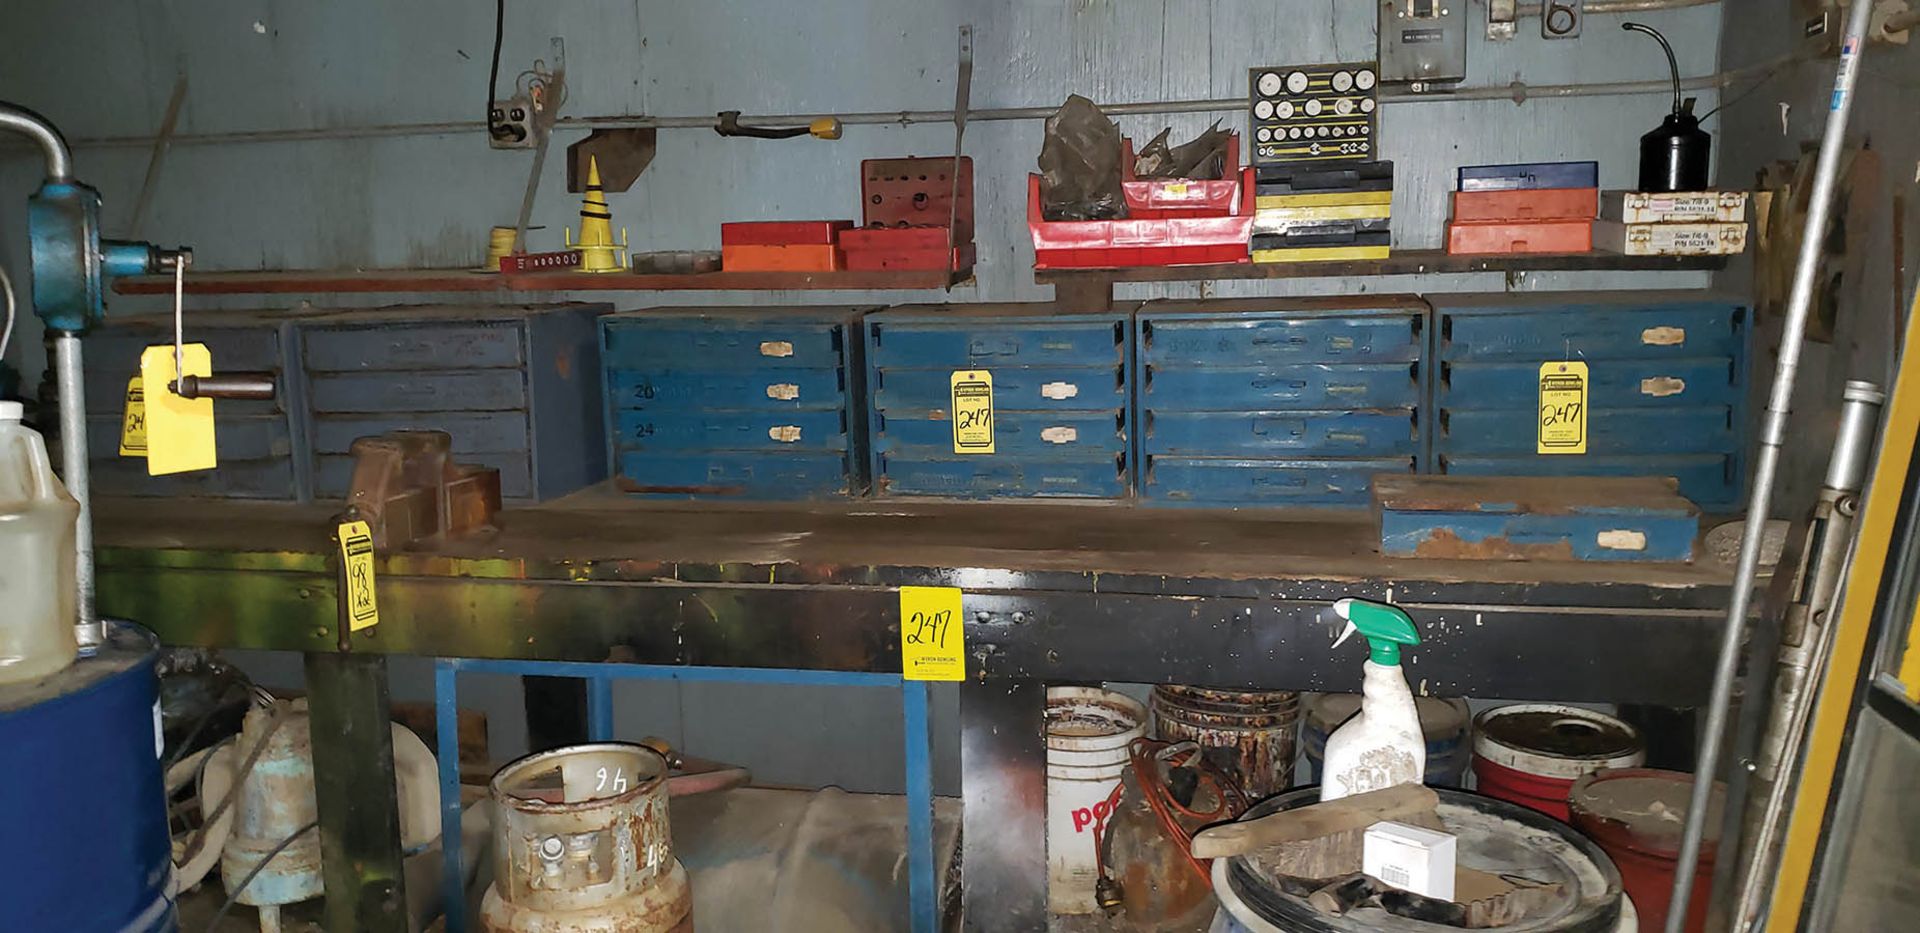 (2) WORK B285BENCHES W/ CONTENT: (12) SMALL PARTS BIN W/ ASSORTED HARDWARE, O-RING KITS, CHAIN & - Image 8 of 10